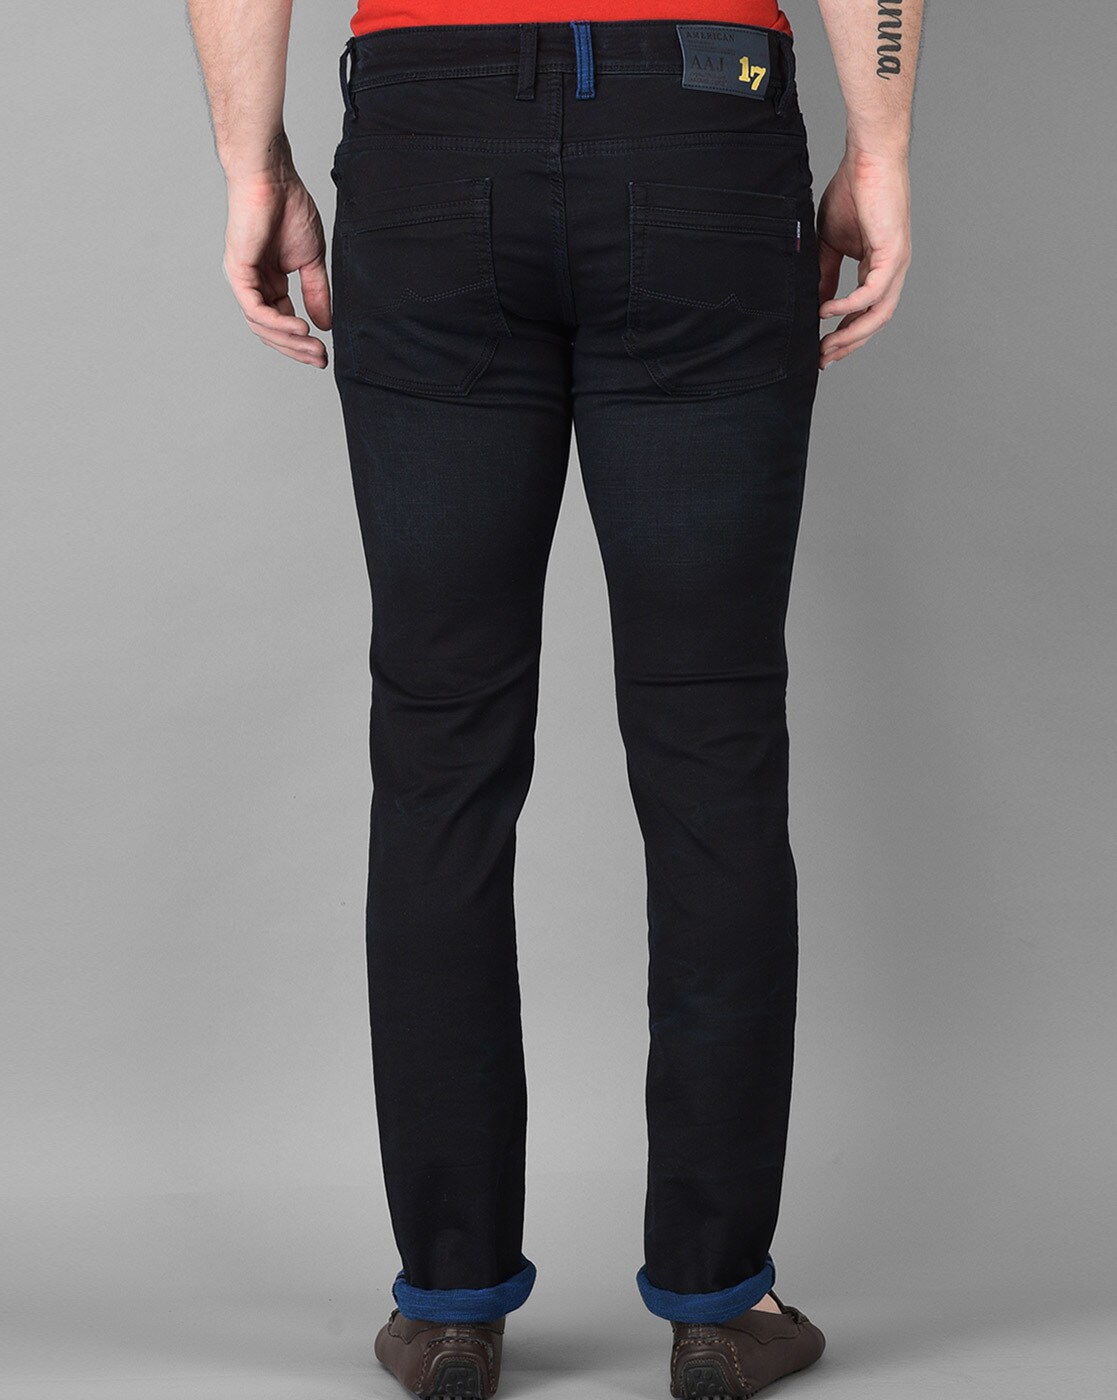 Black Stretch Leather Jeans : Made To Measure Custom Jeans For Men & Women,  MakeYourOwnJeans®